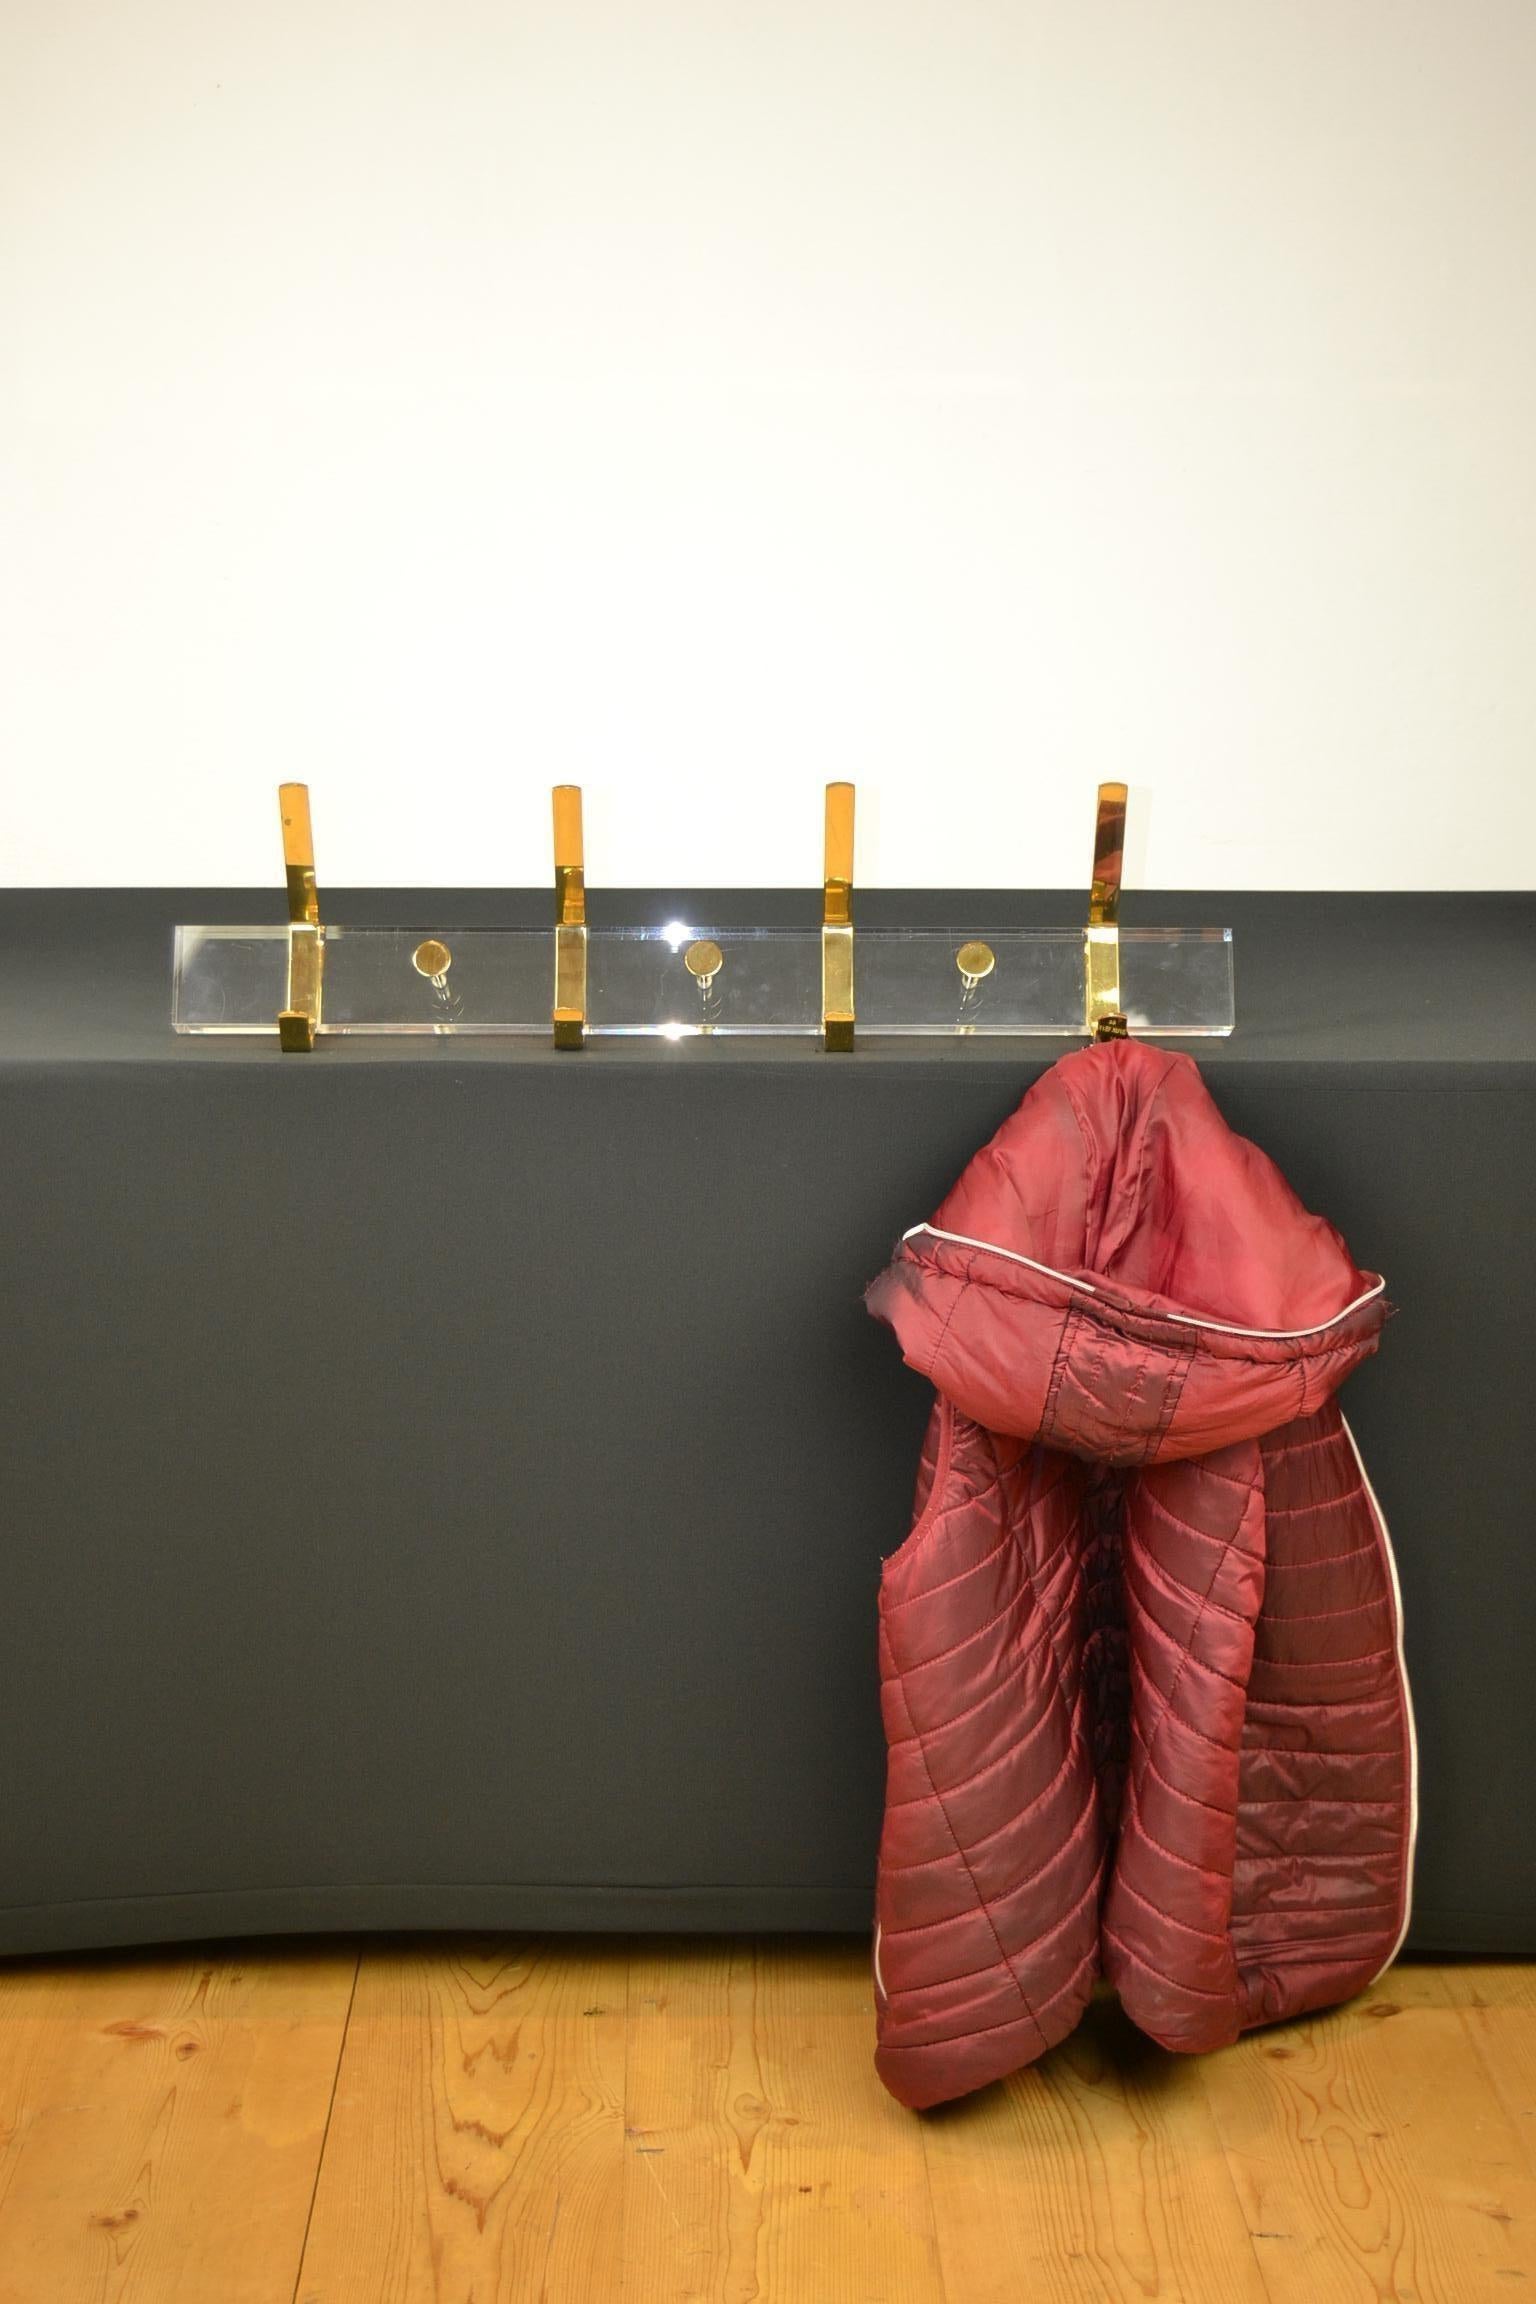 1970s wall coat rack from Lucite with brass hardware.
This acrylic with brass wall coat rack offers space for 4 coats or towels.
A modern coat rack made from Plexiglas.

This Italian coat rack is in used condition with normal traces on the